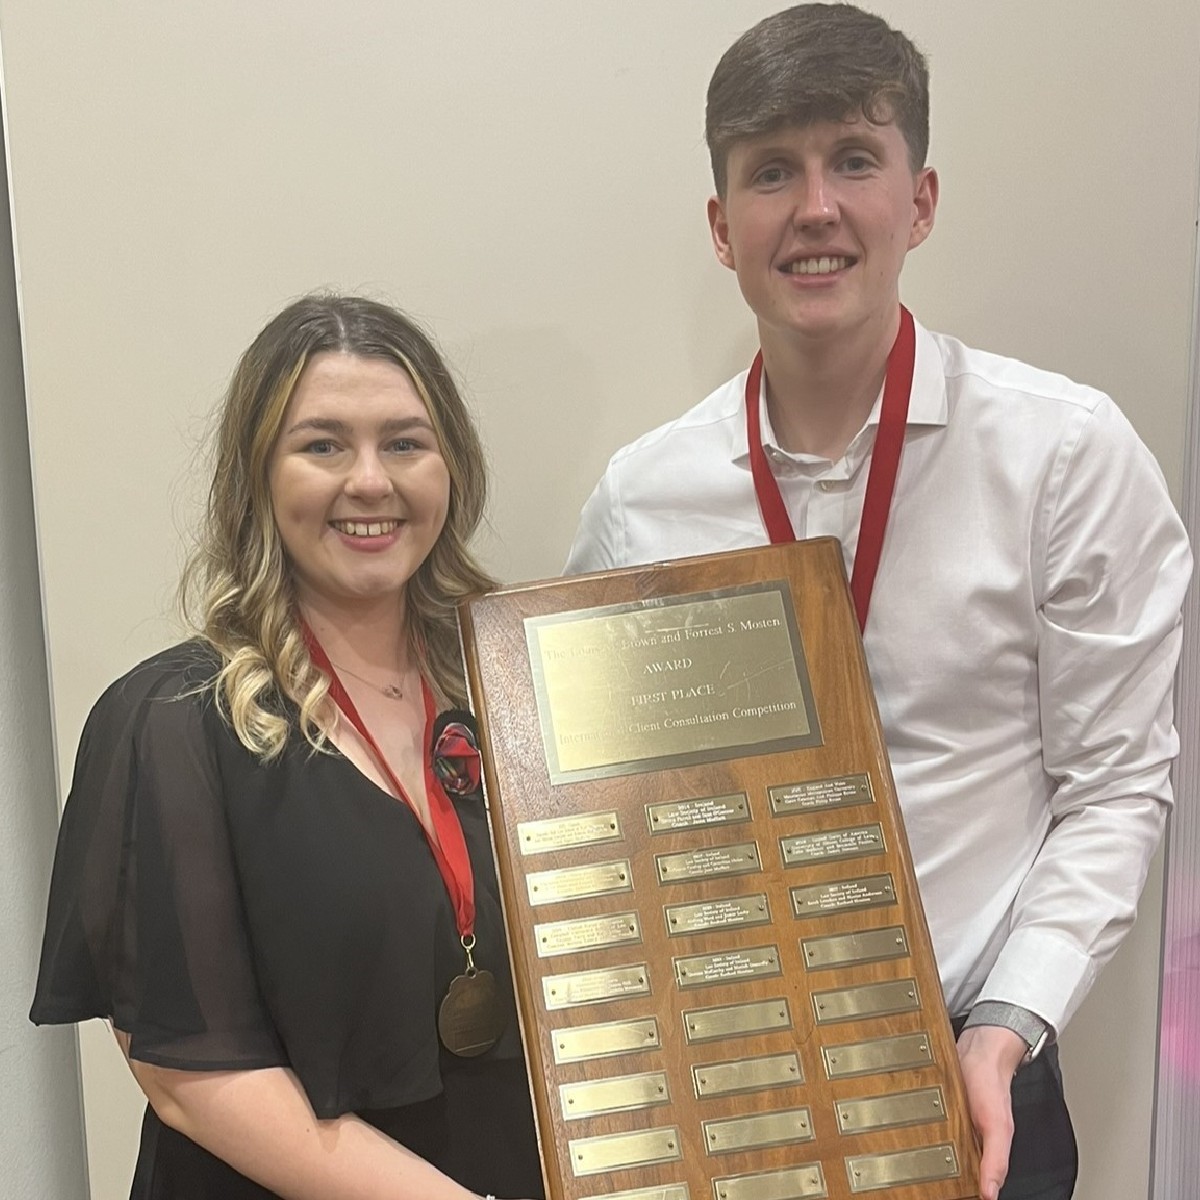 Fantastic result for Law Diploma students Ailsa Gardyne and Callum Leeson who have seen off teams from 21 countries around the world to win the prestigious International Brown Mosten Client Consultation Competition in Poland! We're super proud of you both! abdn.io/CP